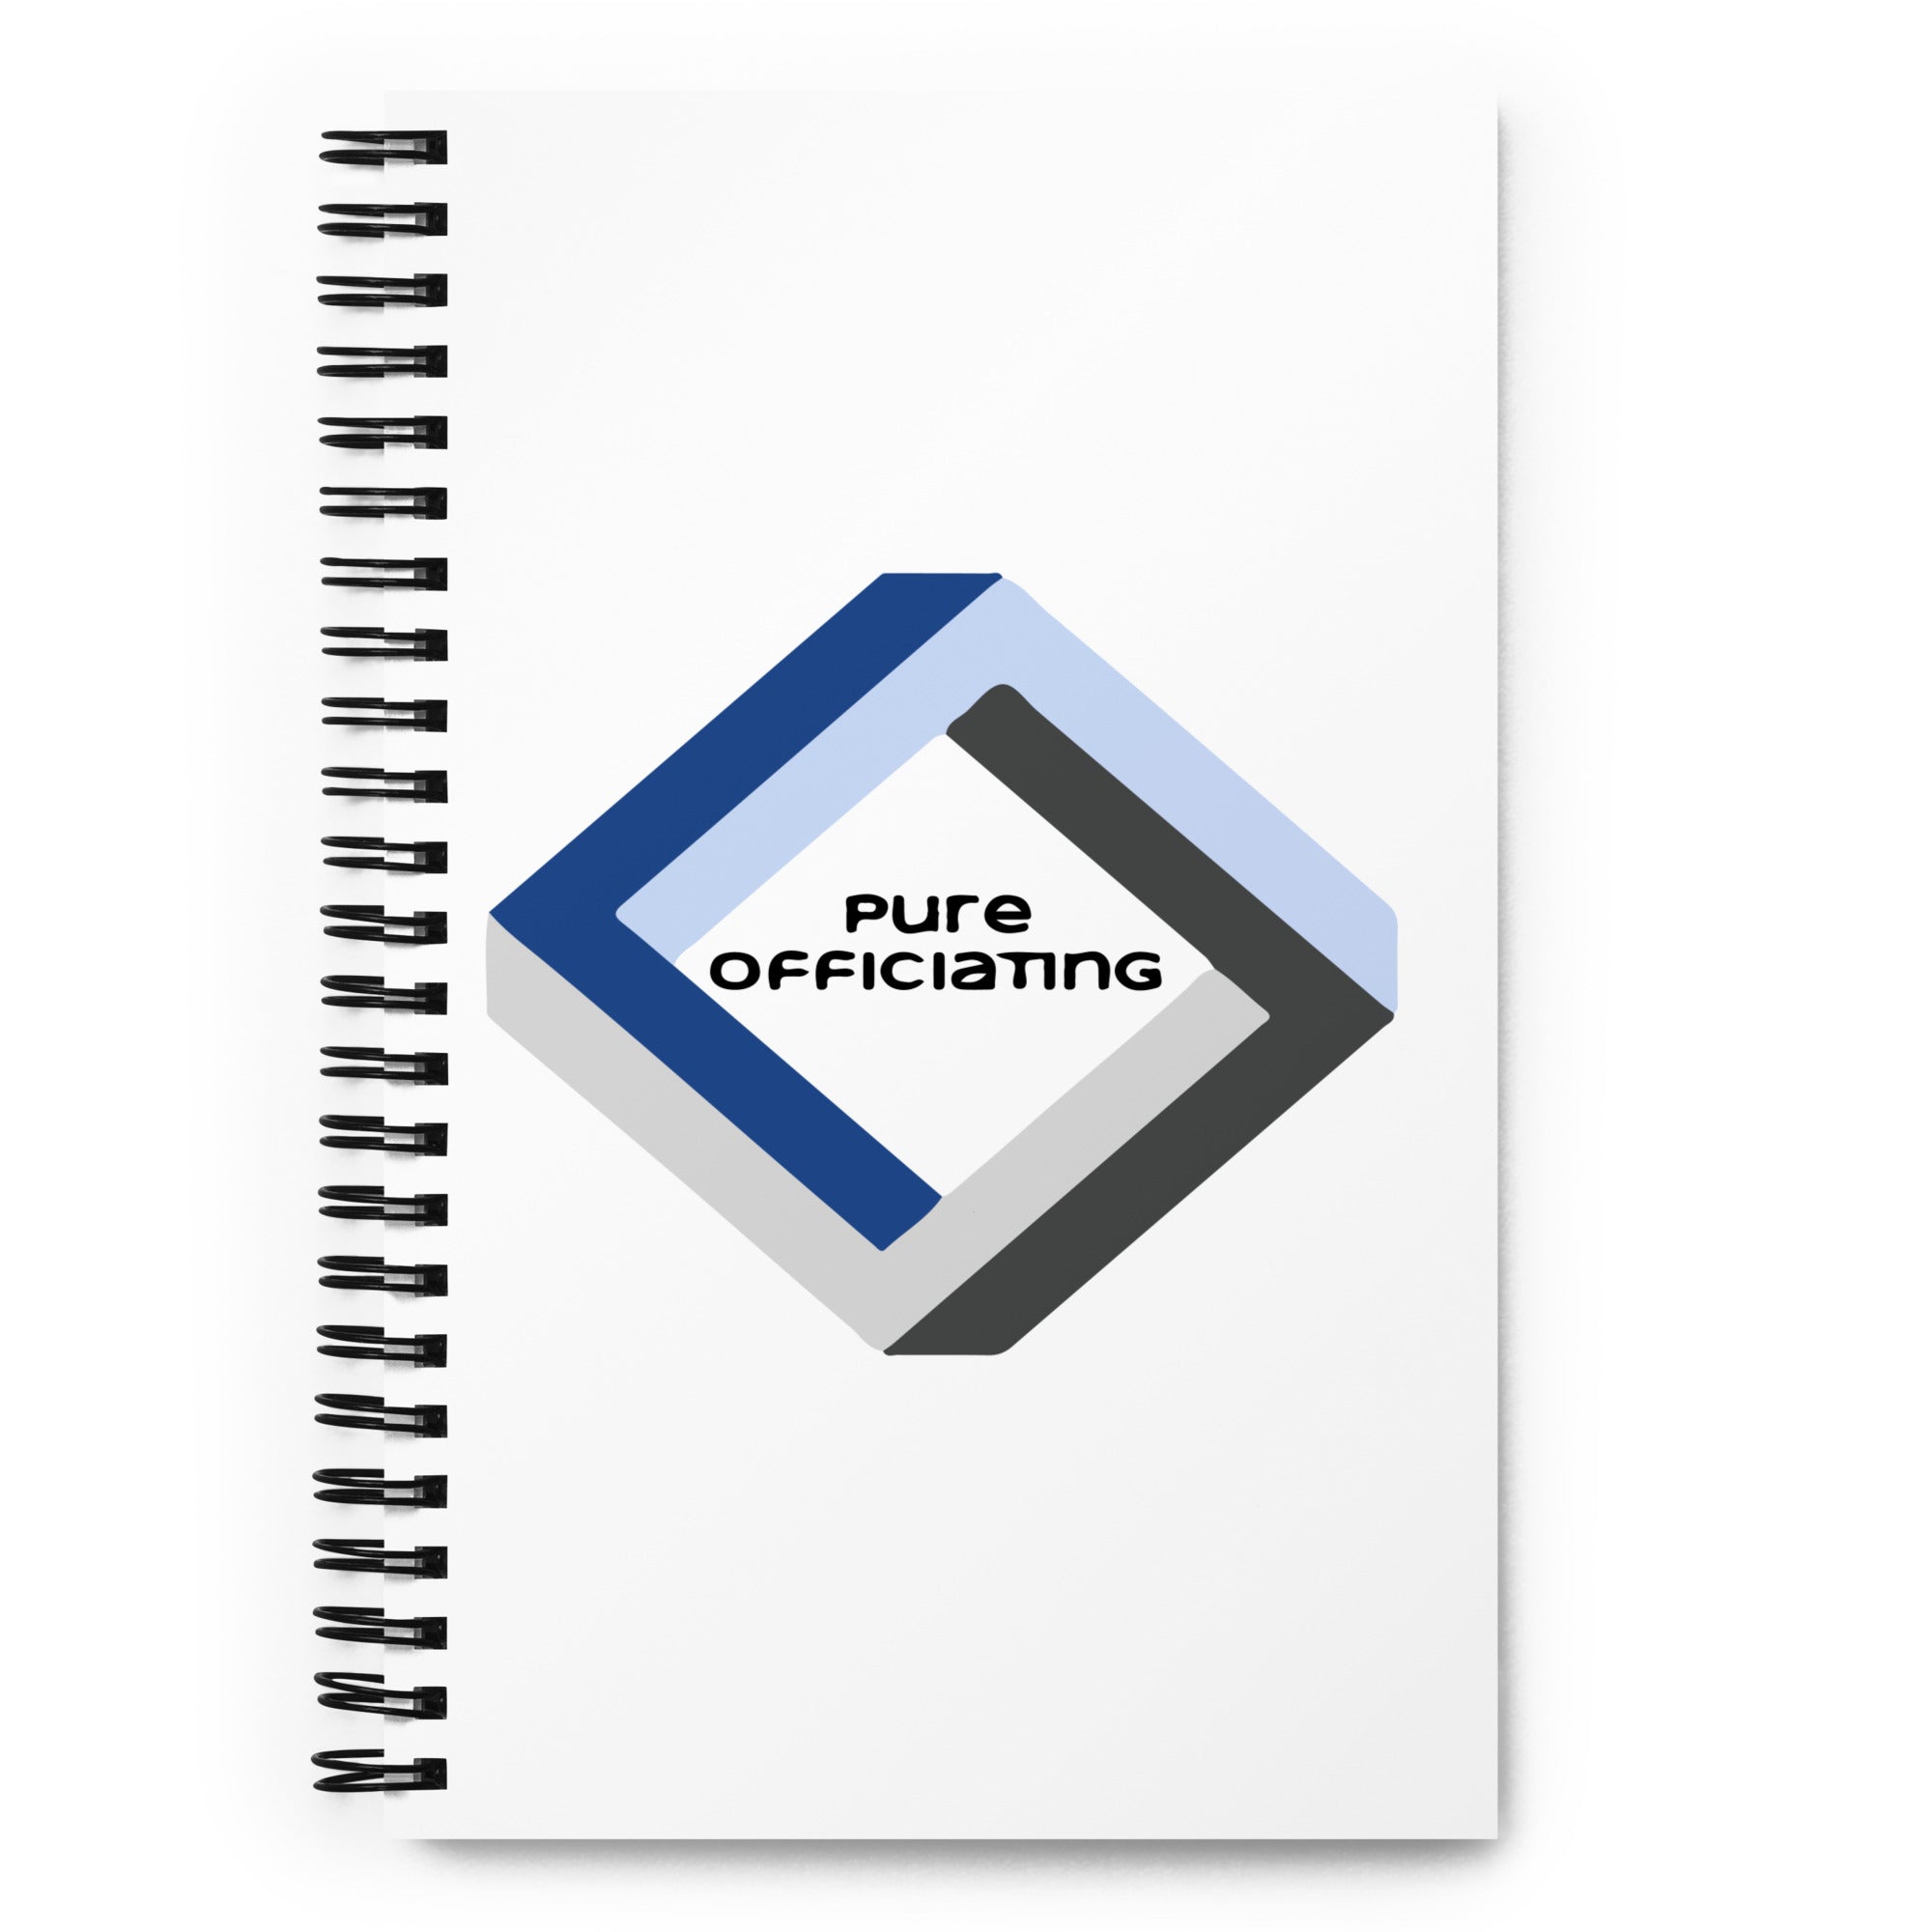 PURE OFFICIATING Spiral notebook